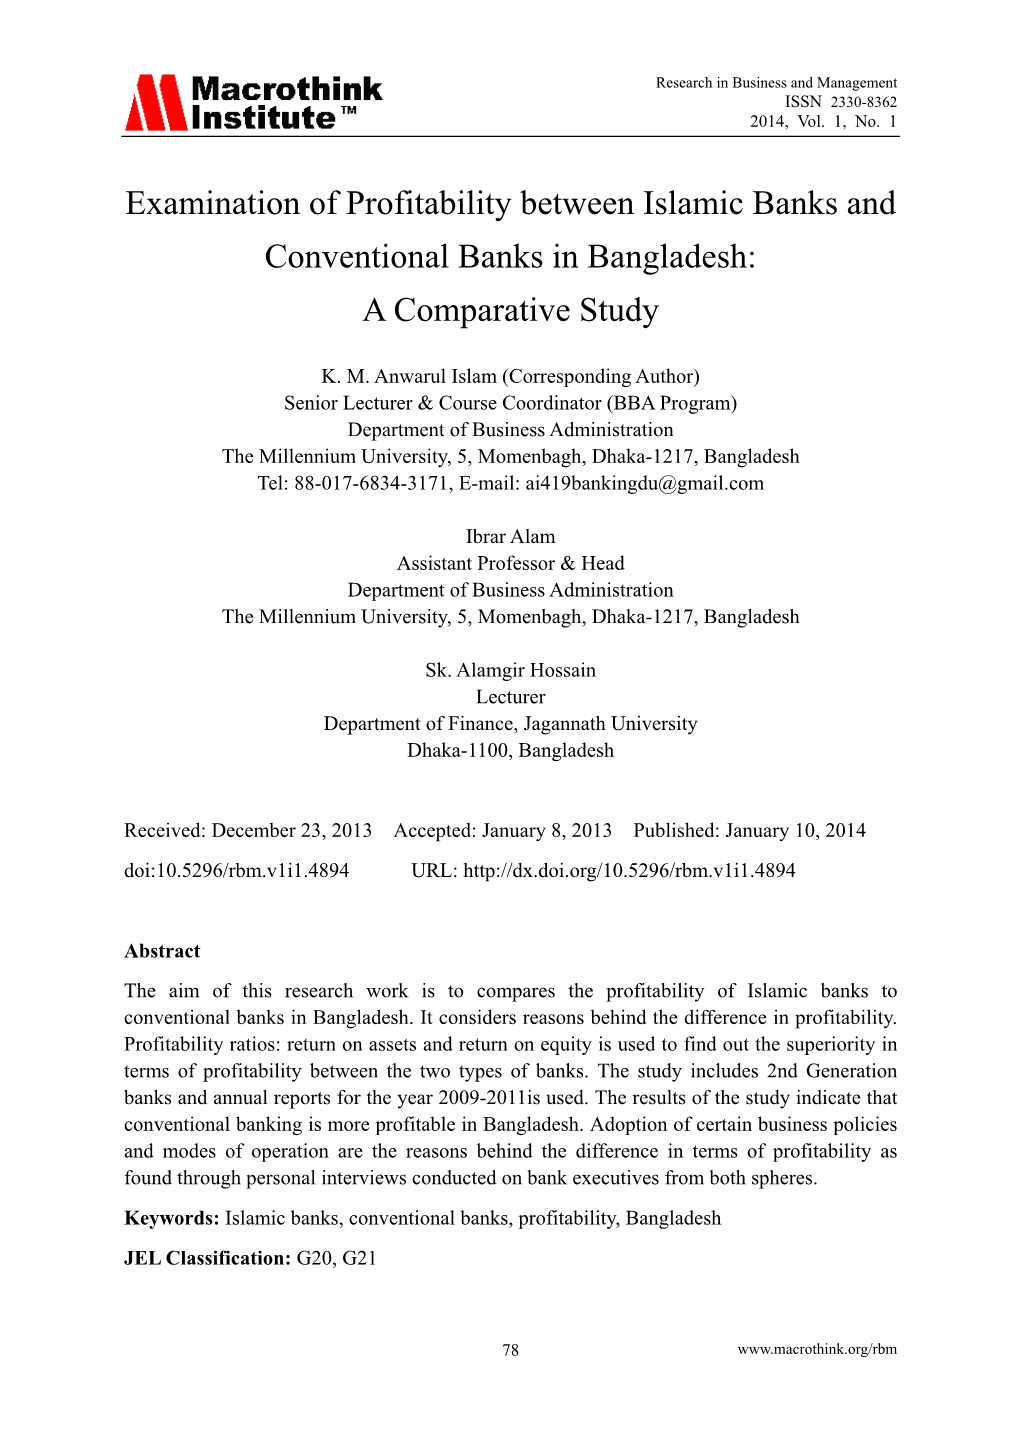 Examination of Profitability Between Islamic Banks and Conventional Banks in Bangladesh: a Comparative Study